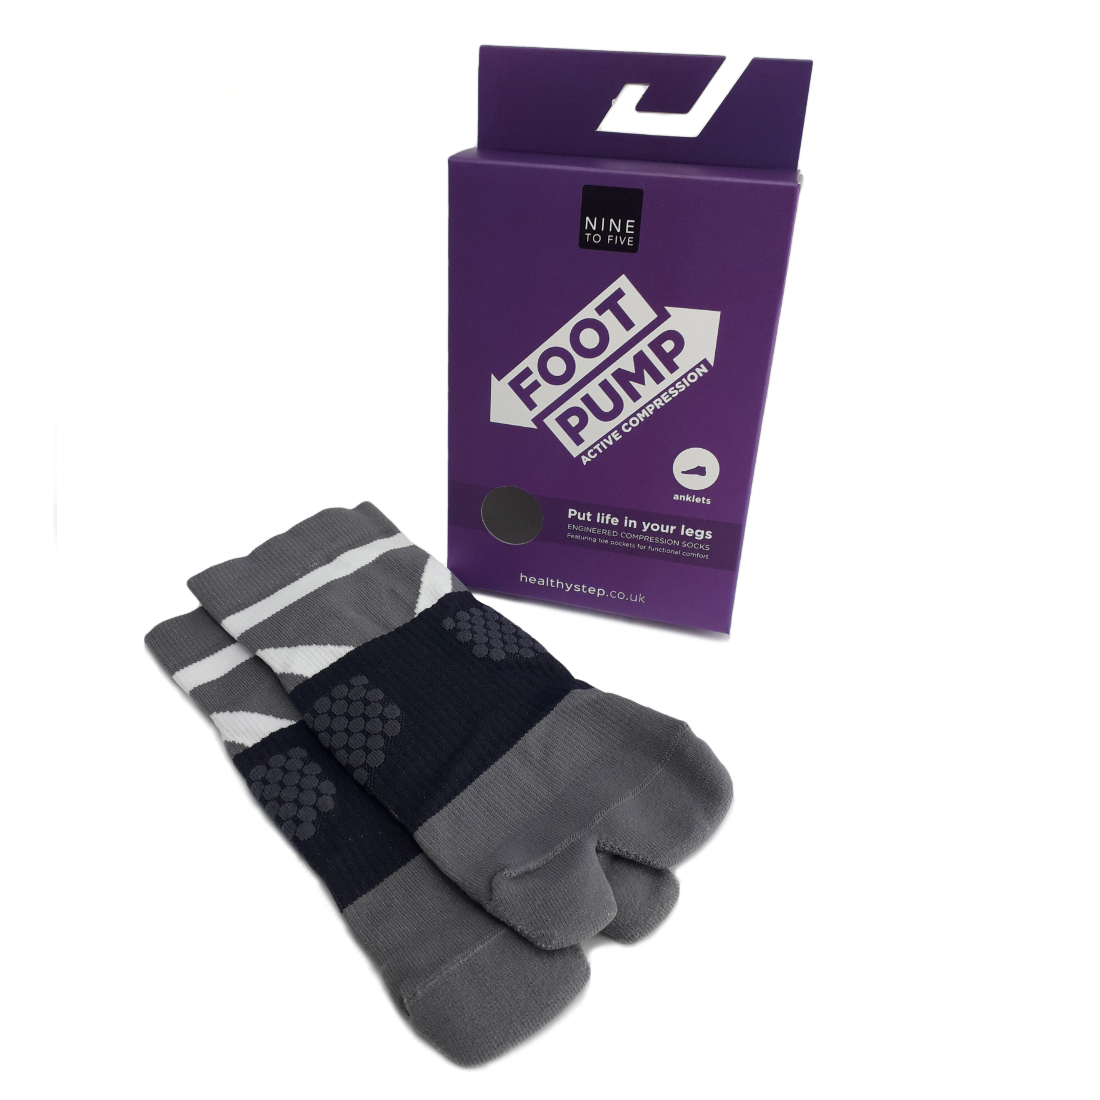 NINE TO FIVE Foot Pump Socks offer you optimum venous #foot pump function (moving blood away from the feet and lower limbs back to the heart) using an innovative combination of compression and #toe pockets that support your foot’s natural function. https://t.co/sii8q8MVu3